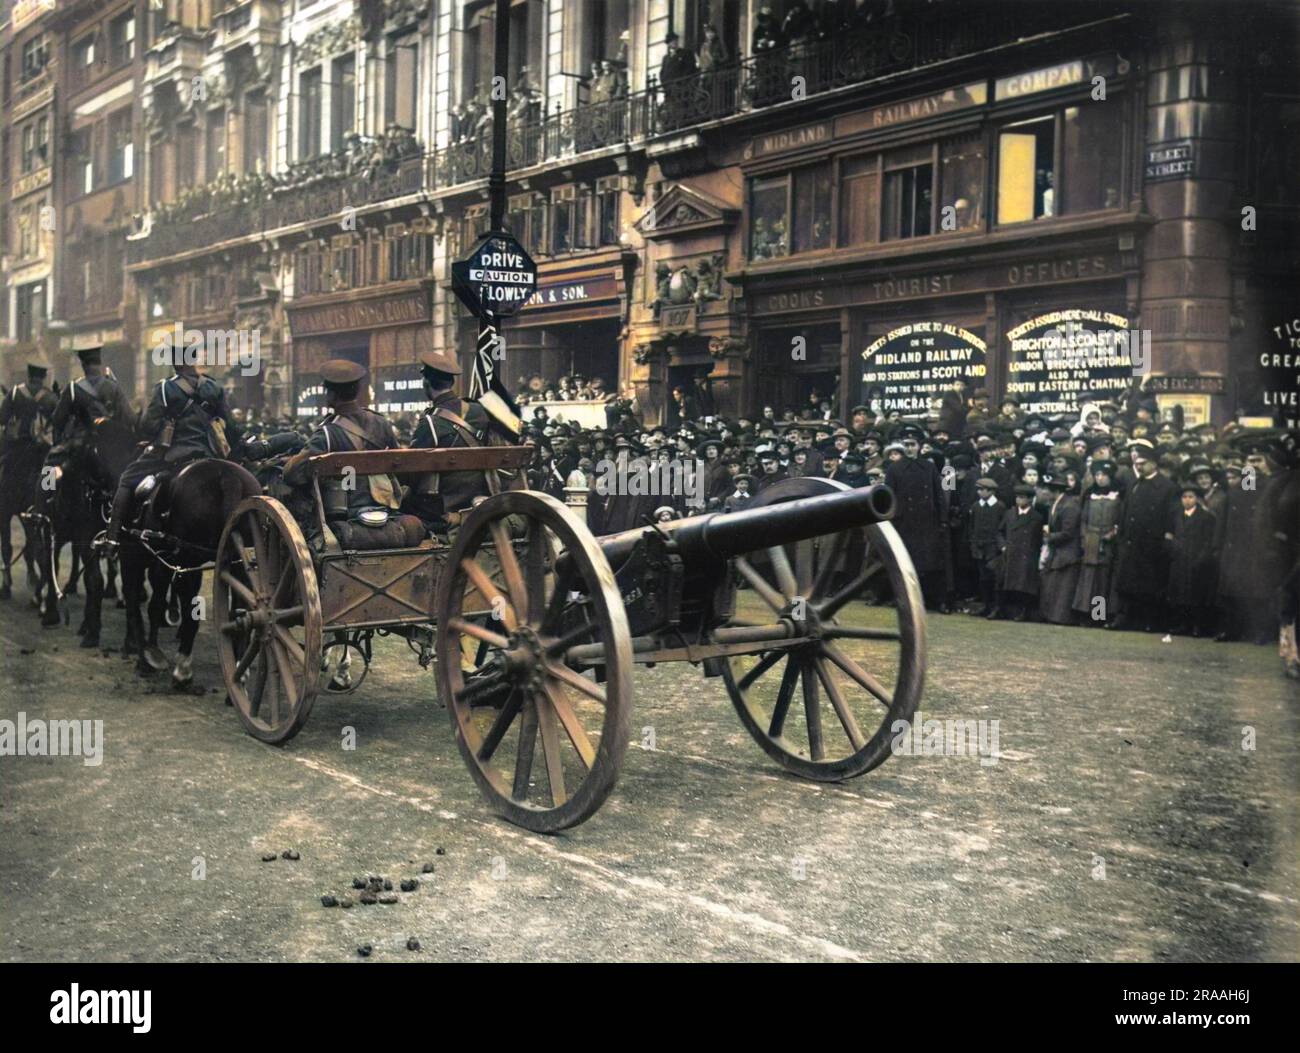 World War One artillery moving down a London street, as a crowd looks on.     Date: C. 1914 Stock Photo